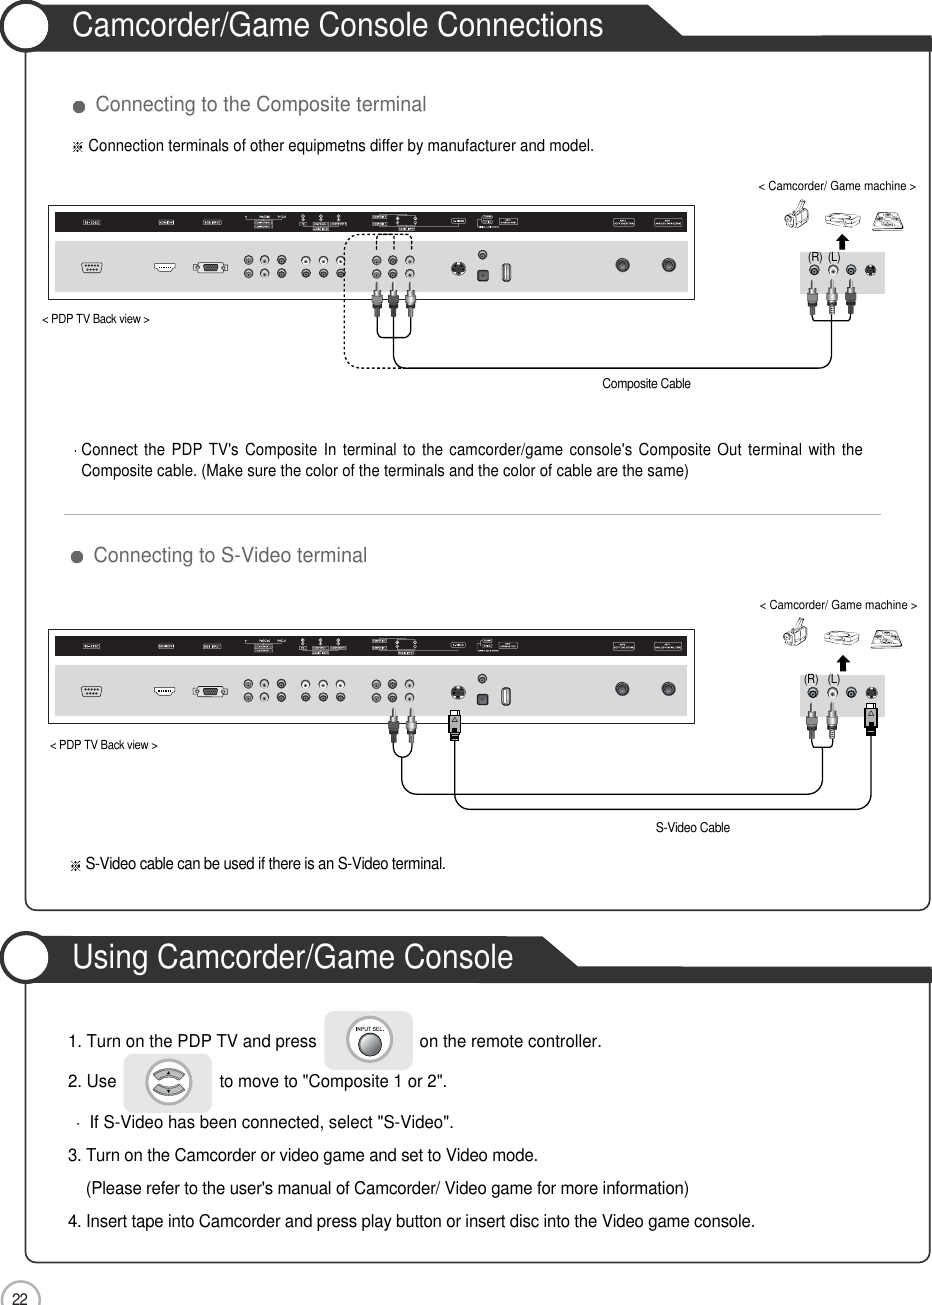 22Camcorder/Game Console ConnectionsUsing Camcorder/Game ConsoleConnection1. Turn on the PDP TV and press                      on the remote controller. 2. Use                      to move to &quot;Composite 1 or 2&quot;. If S-Video has been connected, select &quot;S-Video&quot;. 3. Turn on the Camcorder or video game and set to Video mode.(Please refer to the user&apos;s manual of Camcorder/ Video game for more information)4. Insert tape into Camcorder and press play button or insert disc into the Video game console.Connection terminals of other equipmetns differ by manufacturer and model.&lt; PDP TV Back view &gt;Composite CableS-Video CableConnect the PDP TV&apos;s Composite In terminal to the camcorder/game console&apos;s Composite Out terminal with theComposite cable. (Make sure the color of the terminals and the color of cable are the same)S-Video cable can be used if there is an S-Video terminal. Connecting to the Composite terminalConnecting to S-Video terminal(R) (L)(R) (L)&lt; Camcorder/ Game machine &gt;&lt; Camcorder/ Game machine &gt;&lt; PDP TV Back view &gt;